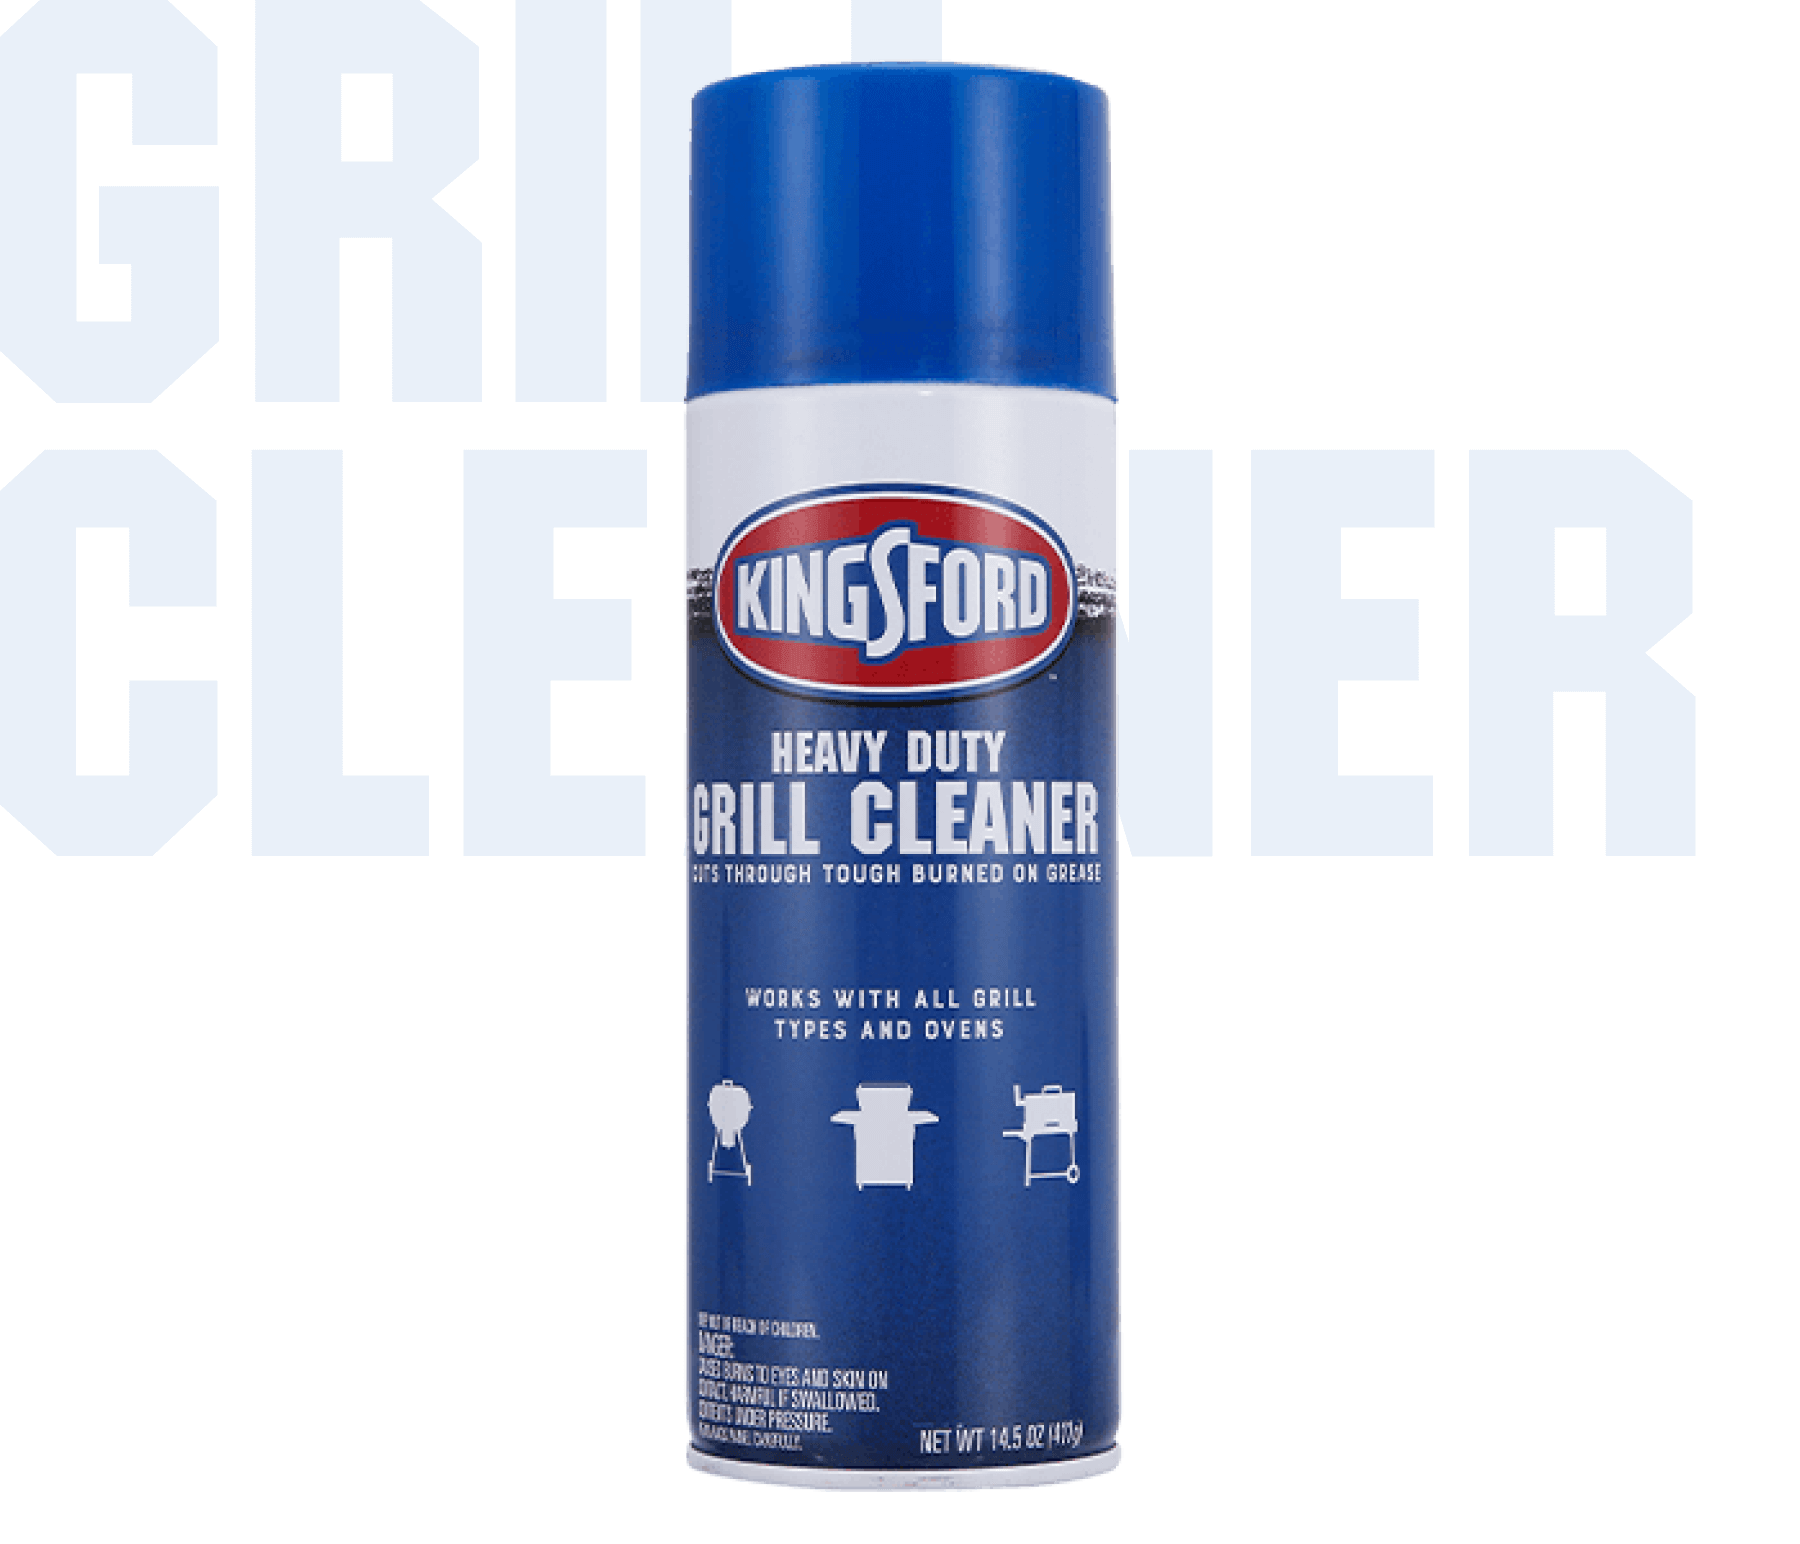 https://www.kingsford.com/wp-content/uploads/2019/05/acc-grill-cleaner-972x772@2x.png